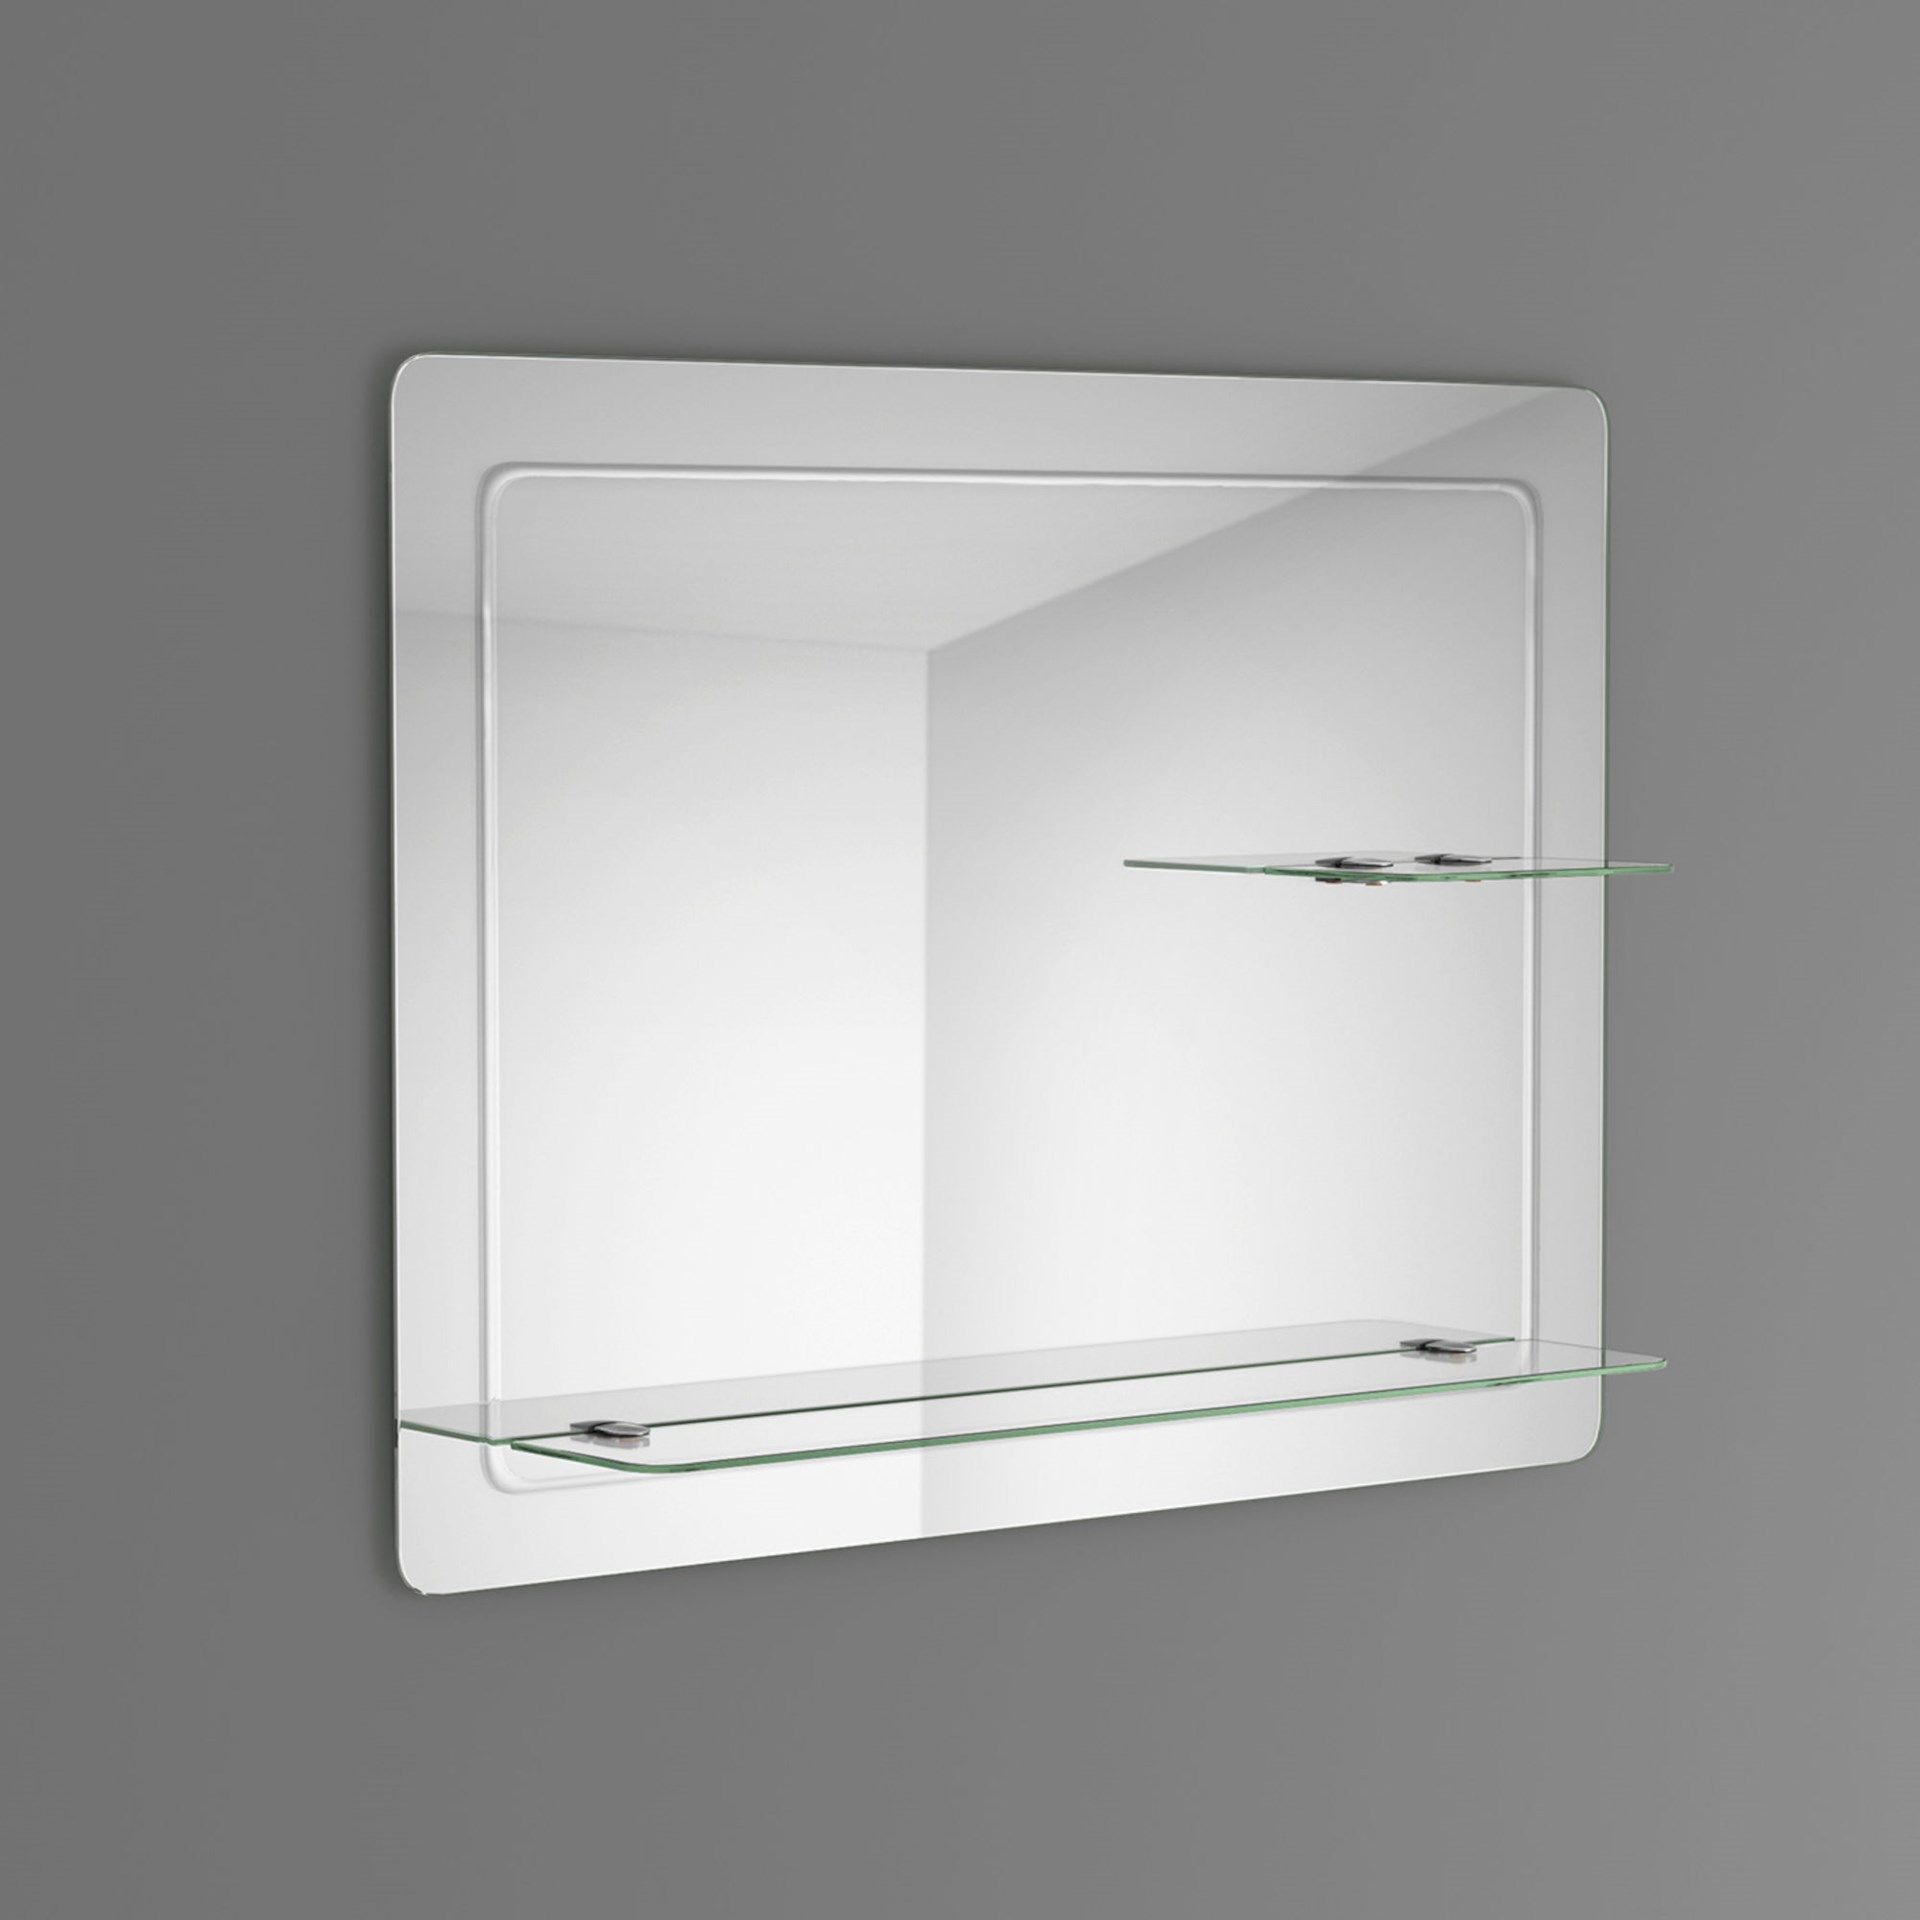 (UK60) 800x600mm Loxely Mirror & Shelf. Smooth beveled edge for additional safety and style Two - Image 3 of 3